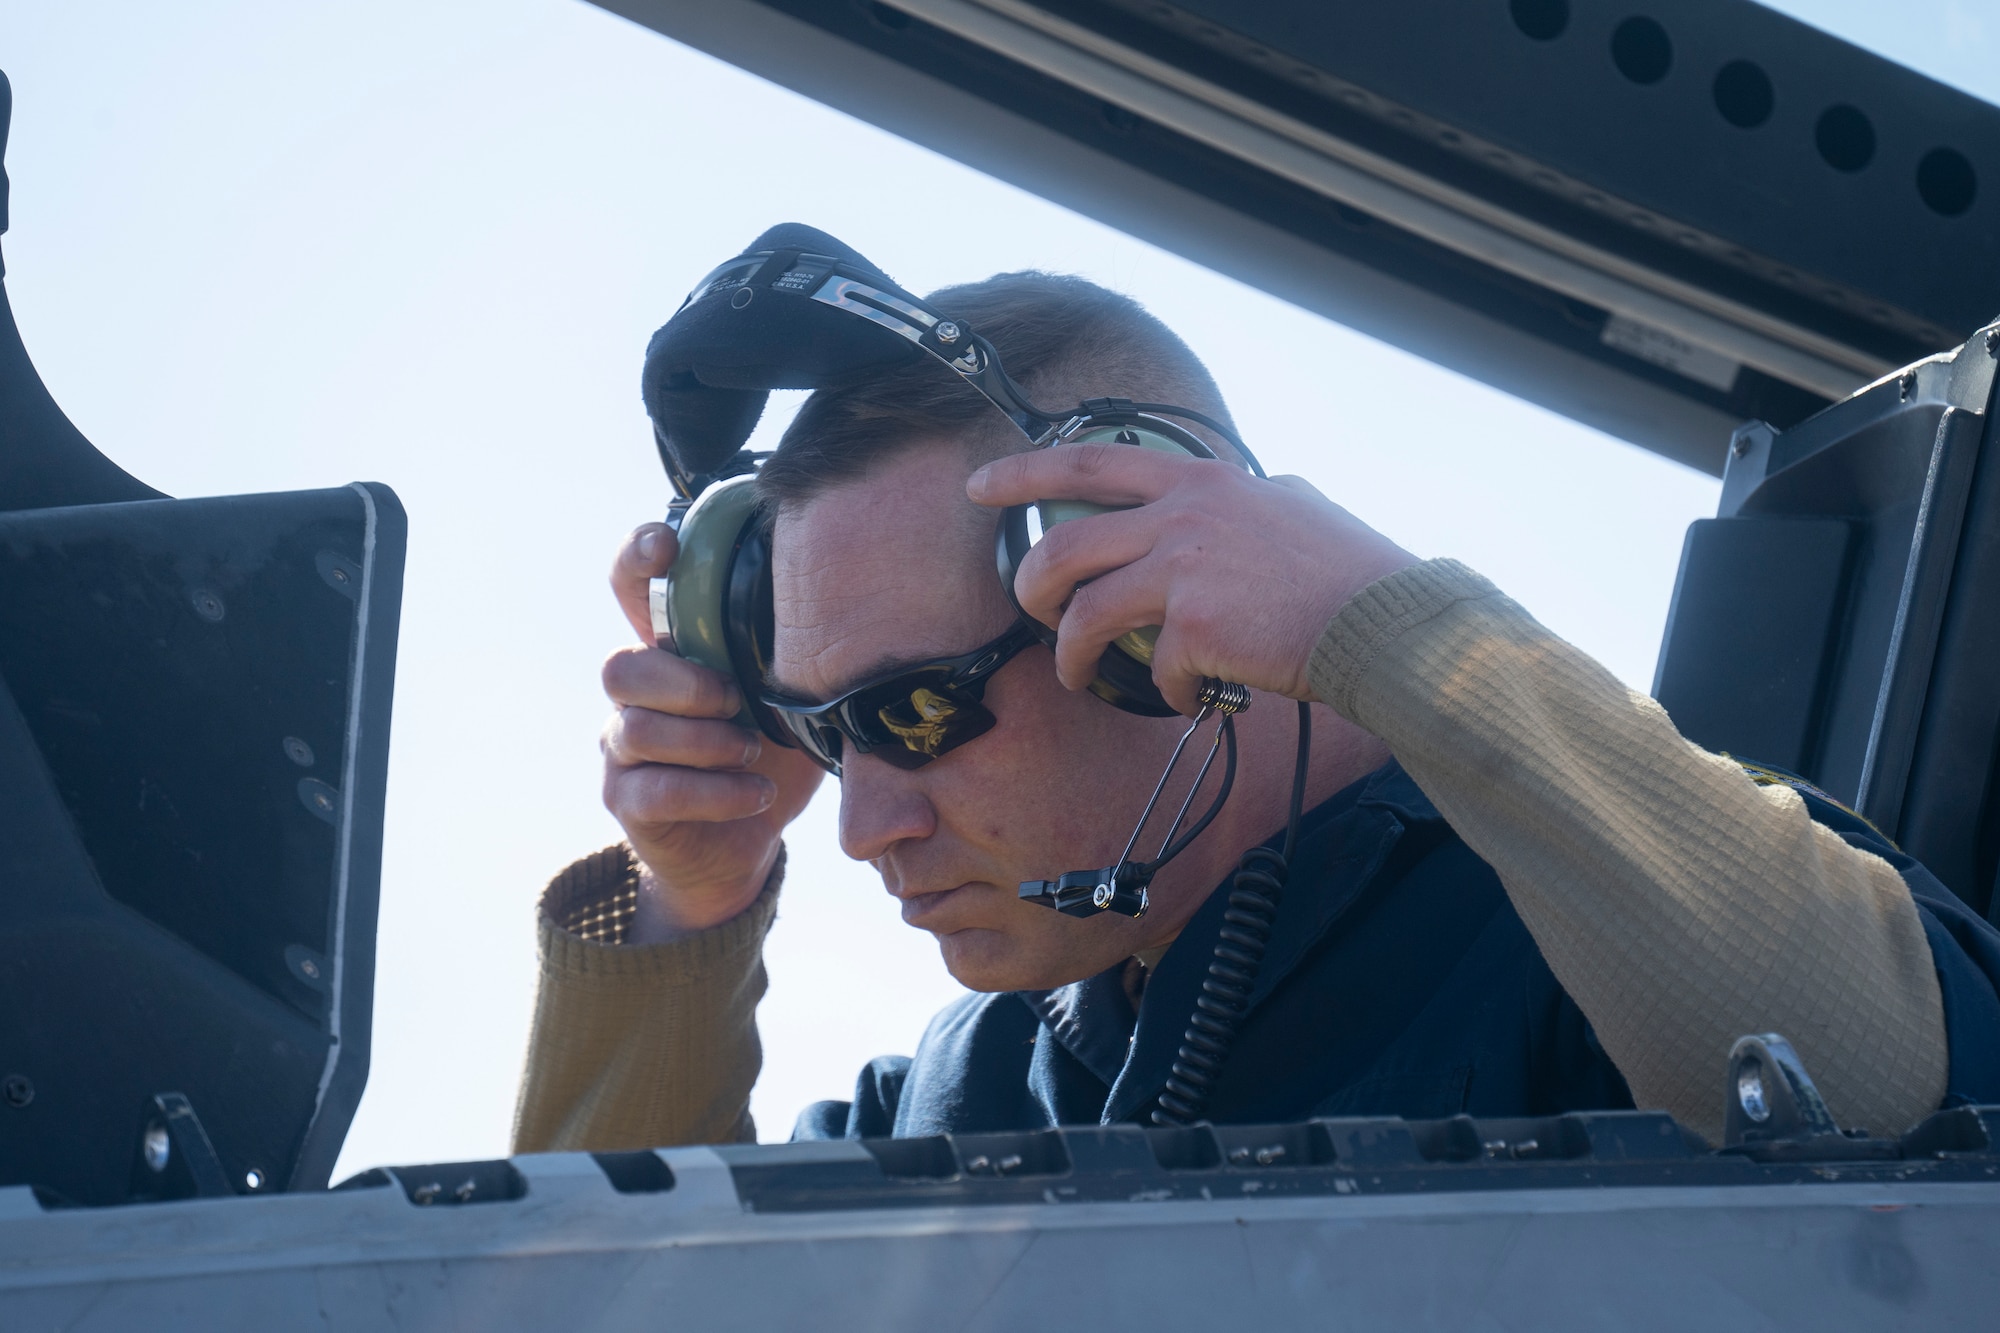 U.S. Air Force Master Sgt. Joshua Eller puts his headset on while in the cockpit of an F-22 Raptor fighter jet